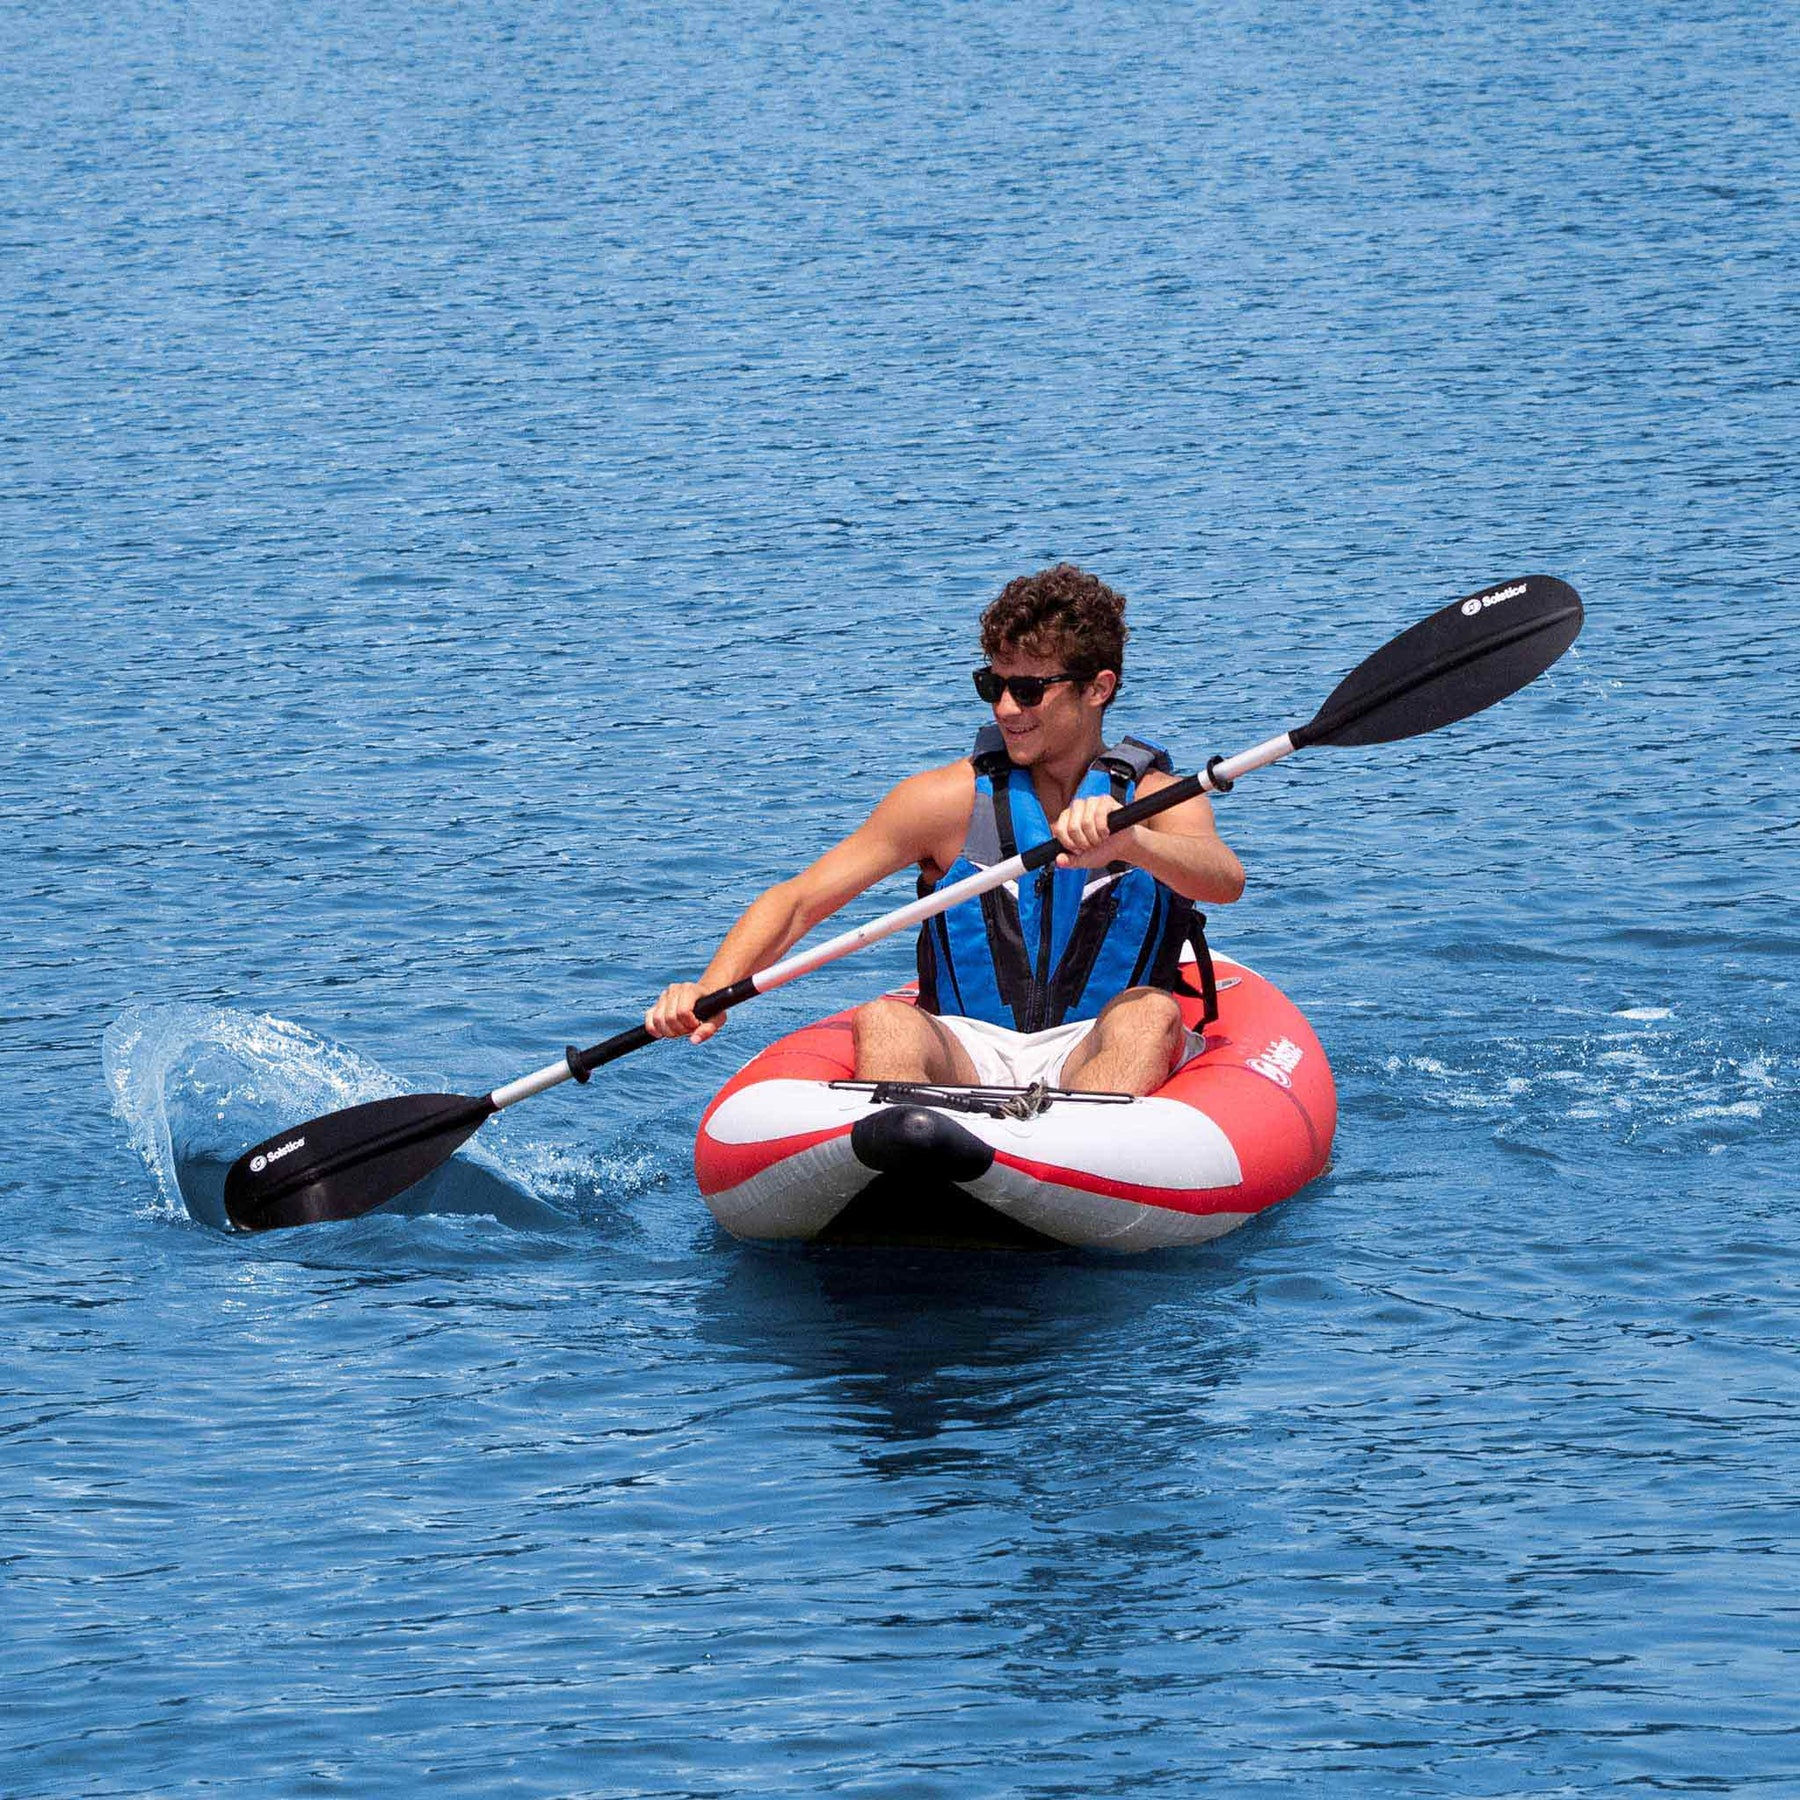 Solstice Watersports Flare 1-Person Inflatable Kayak